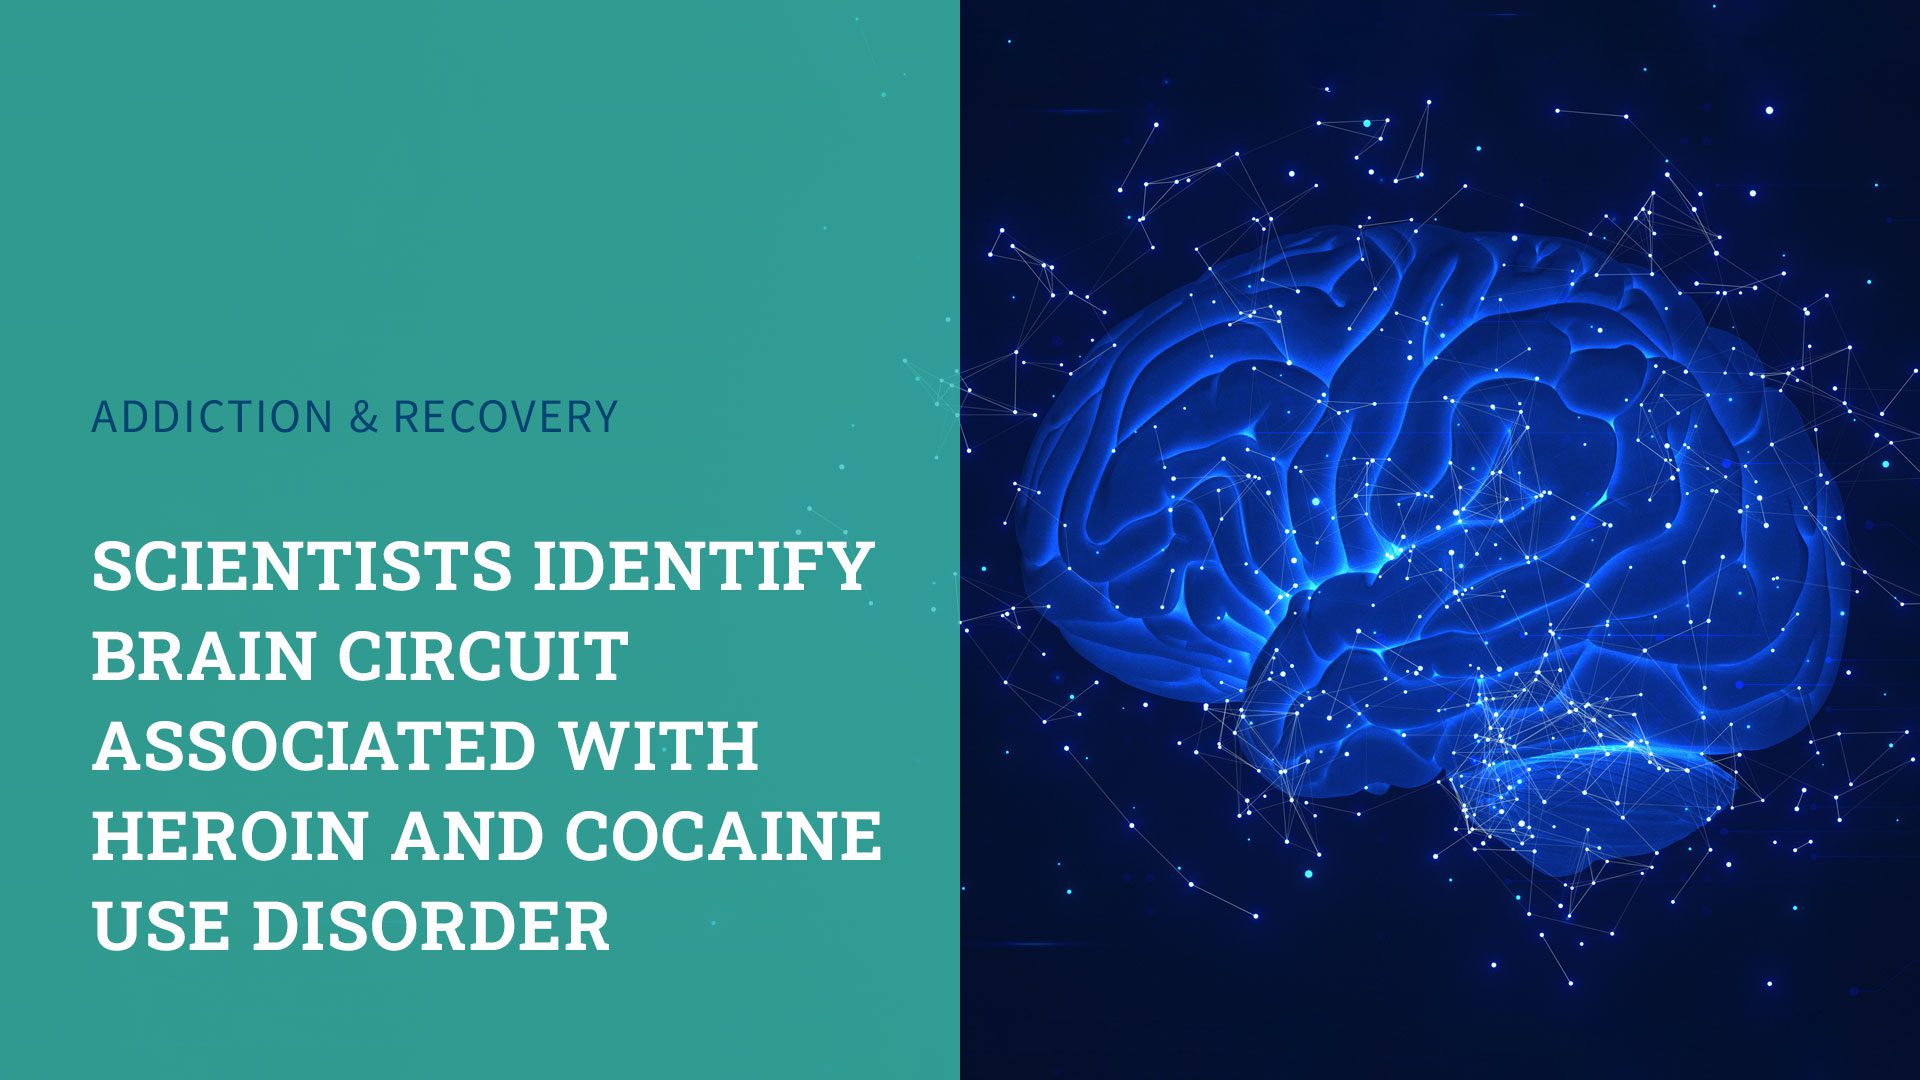 Research Report: Scientists Identify Brain Circuit Associated With Heroin and Cocaine Use Disorder 